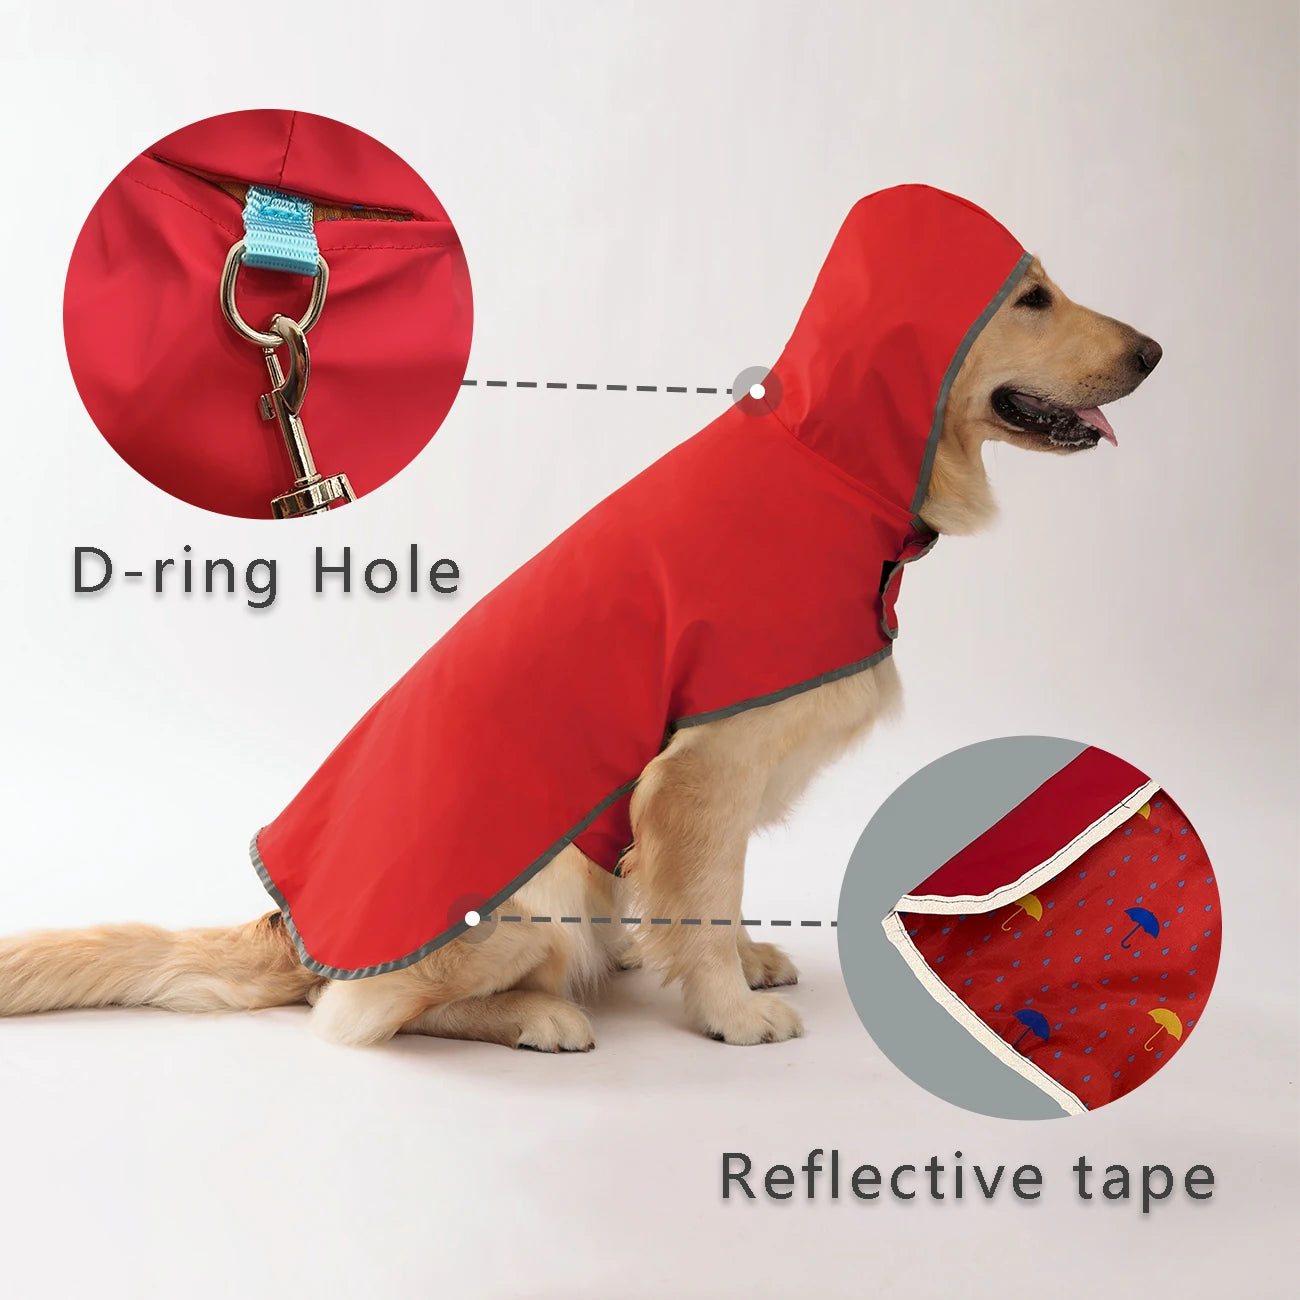 Keep Your Pup Dry & Stylish: Double-Layer Raincoat With Two-Way Wear!